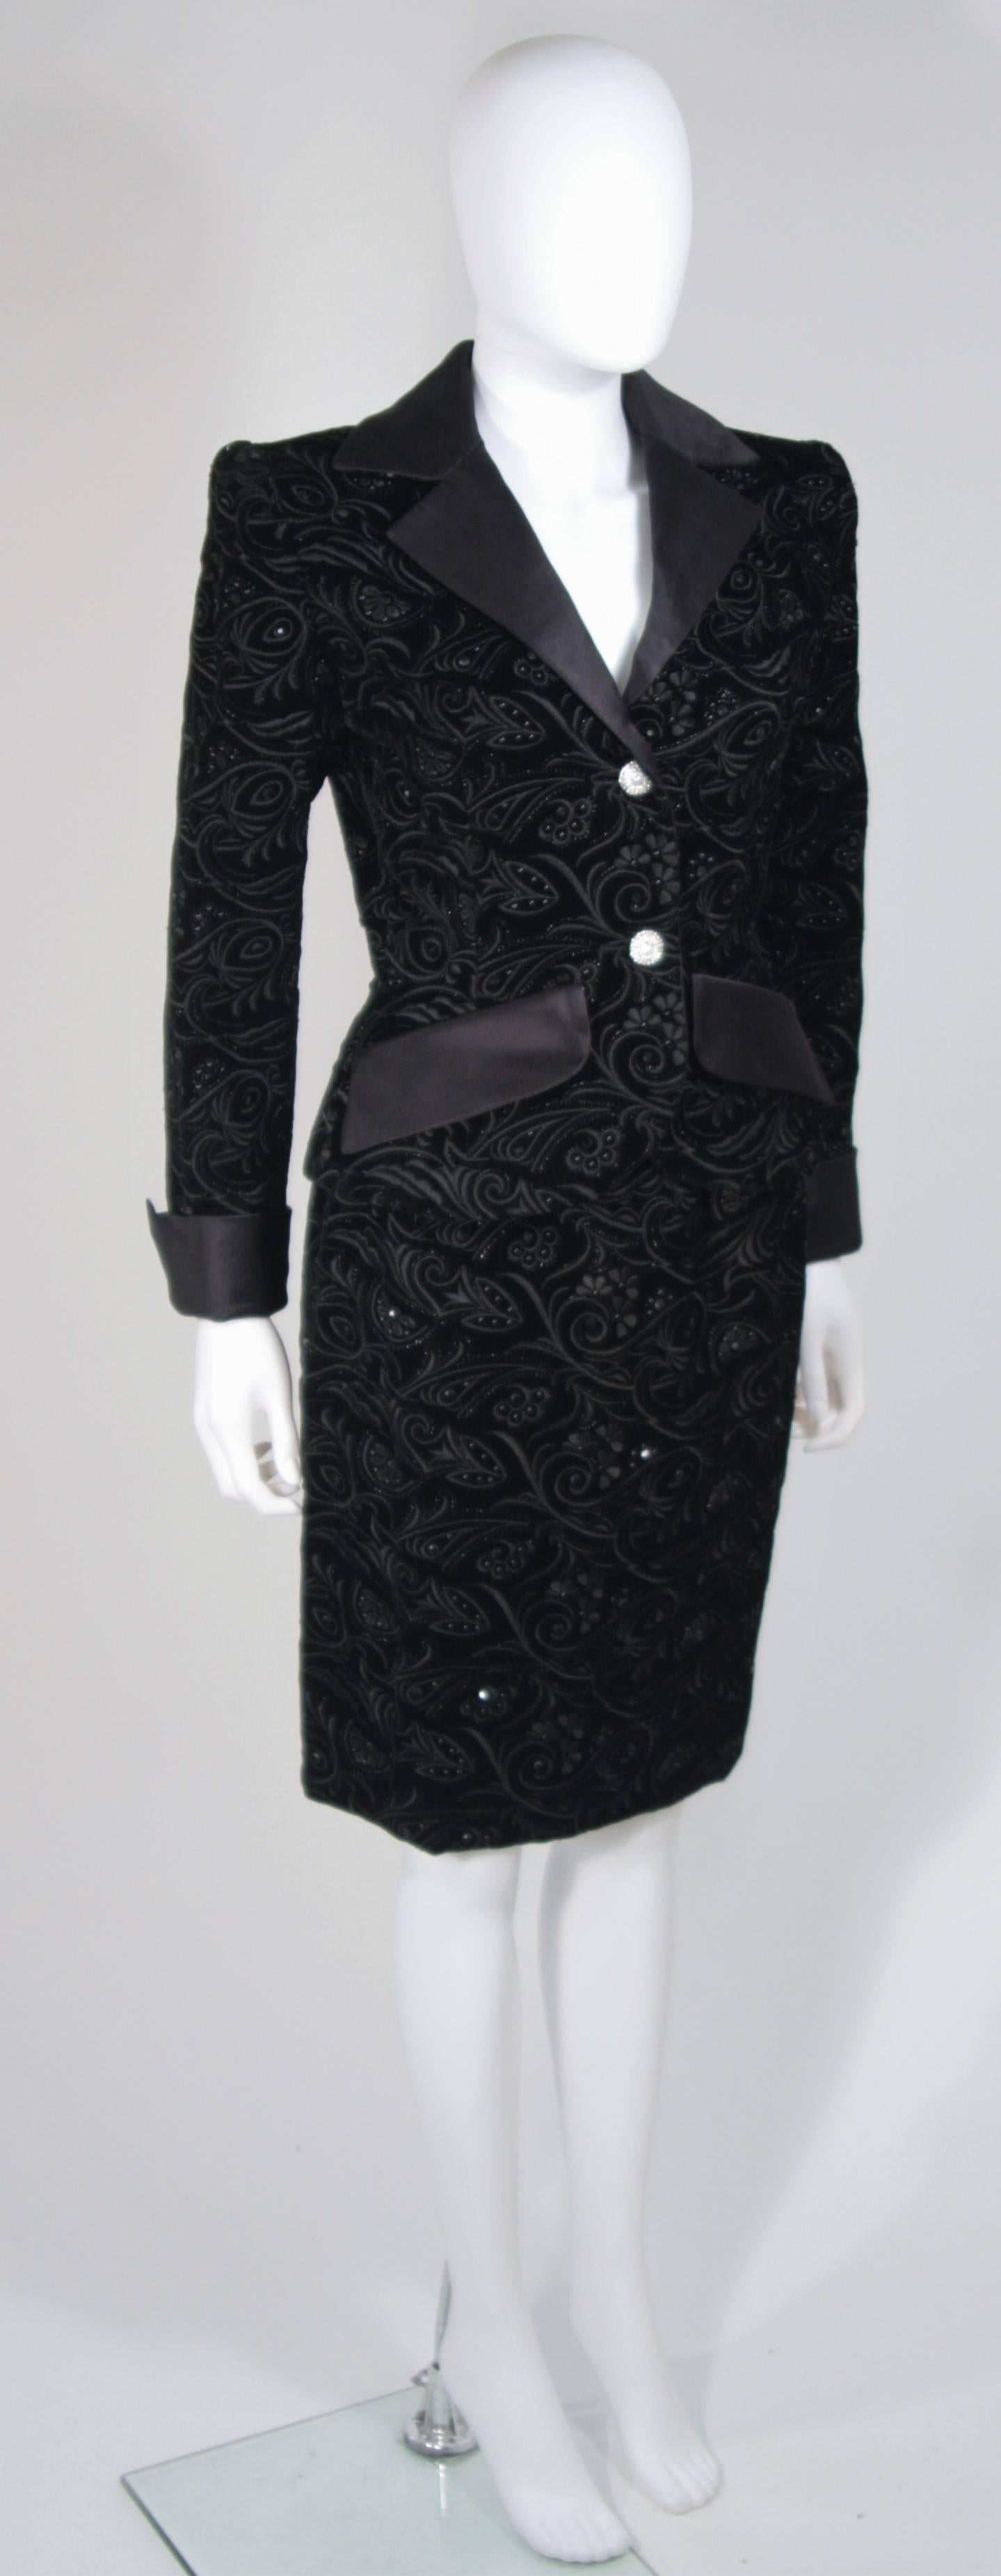 Women's GIVENCHY COUTURE 1980s Black Velvet Floral Embroidered Embellished Suit Size 4-6